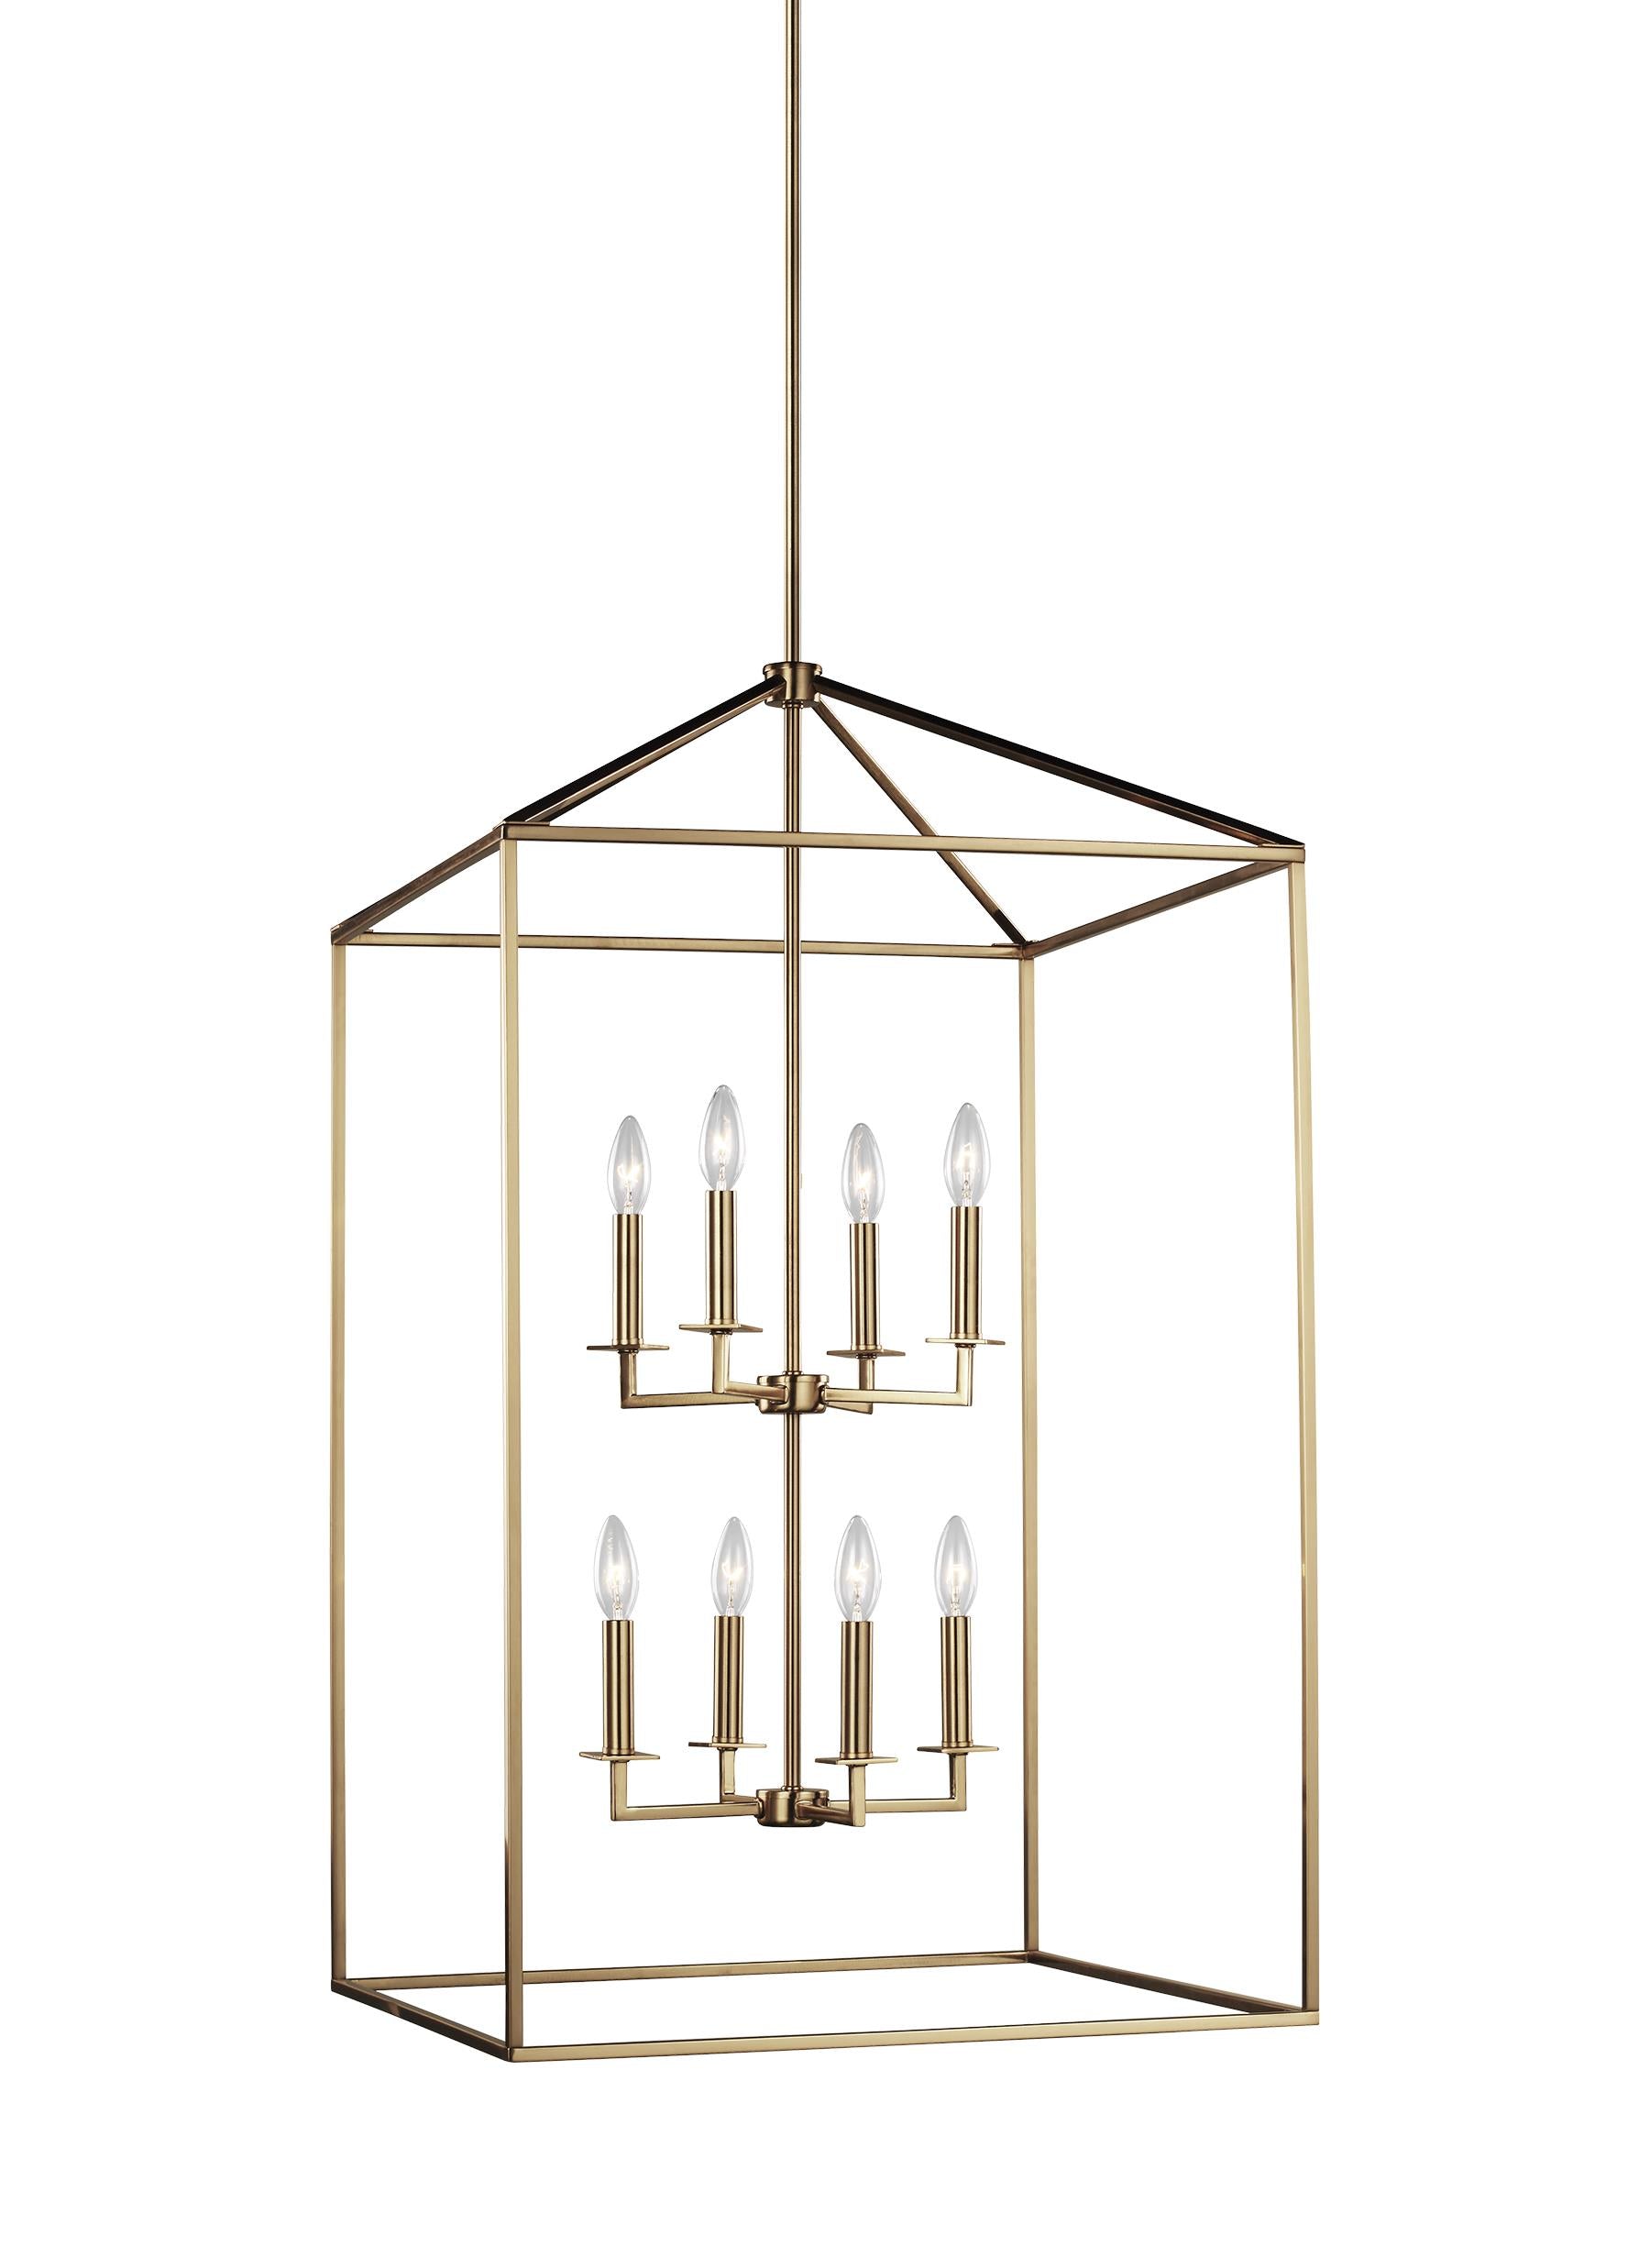 Perryton transitional 8-light indoor dimmable extra large ceiling pendant hanging chandelier light in satin brass gold finish